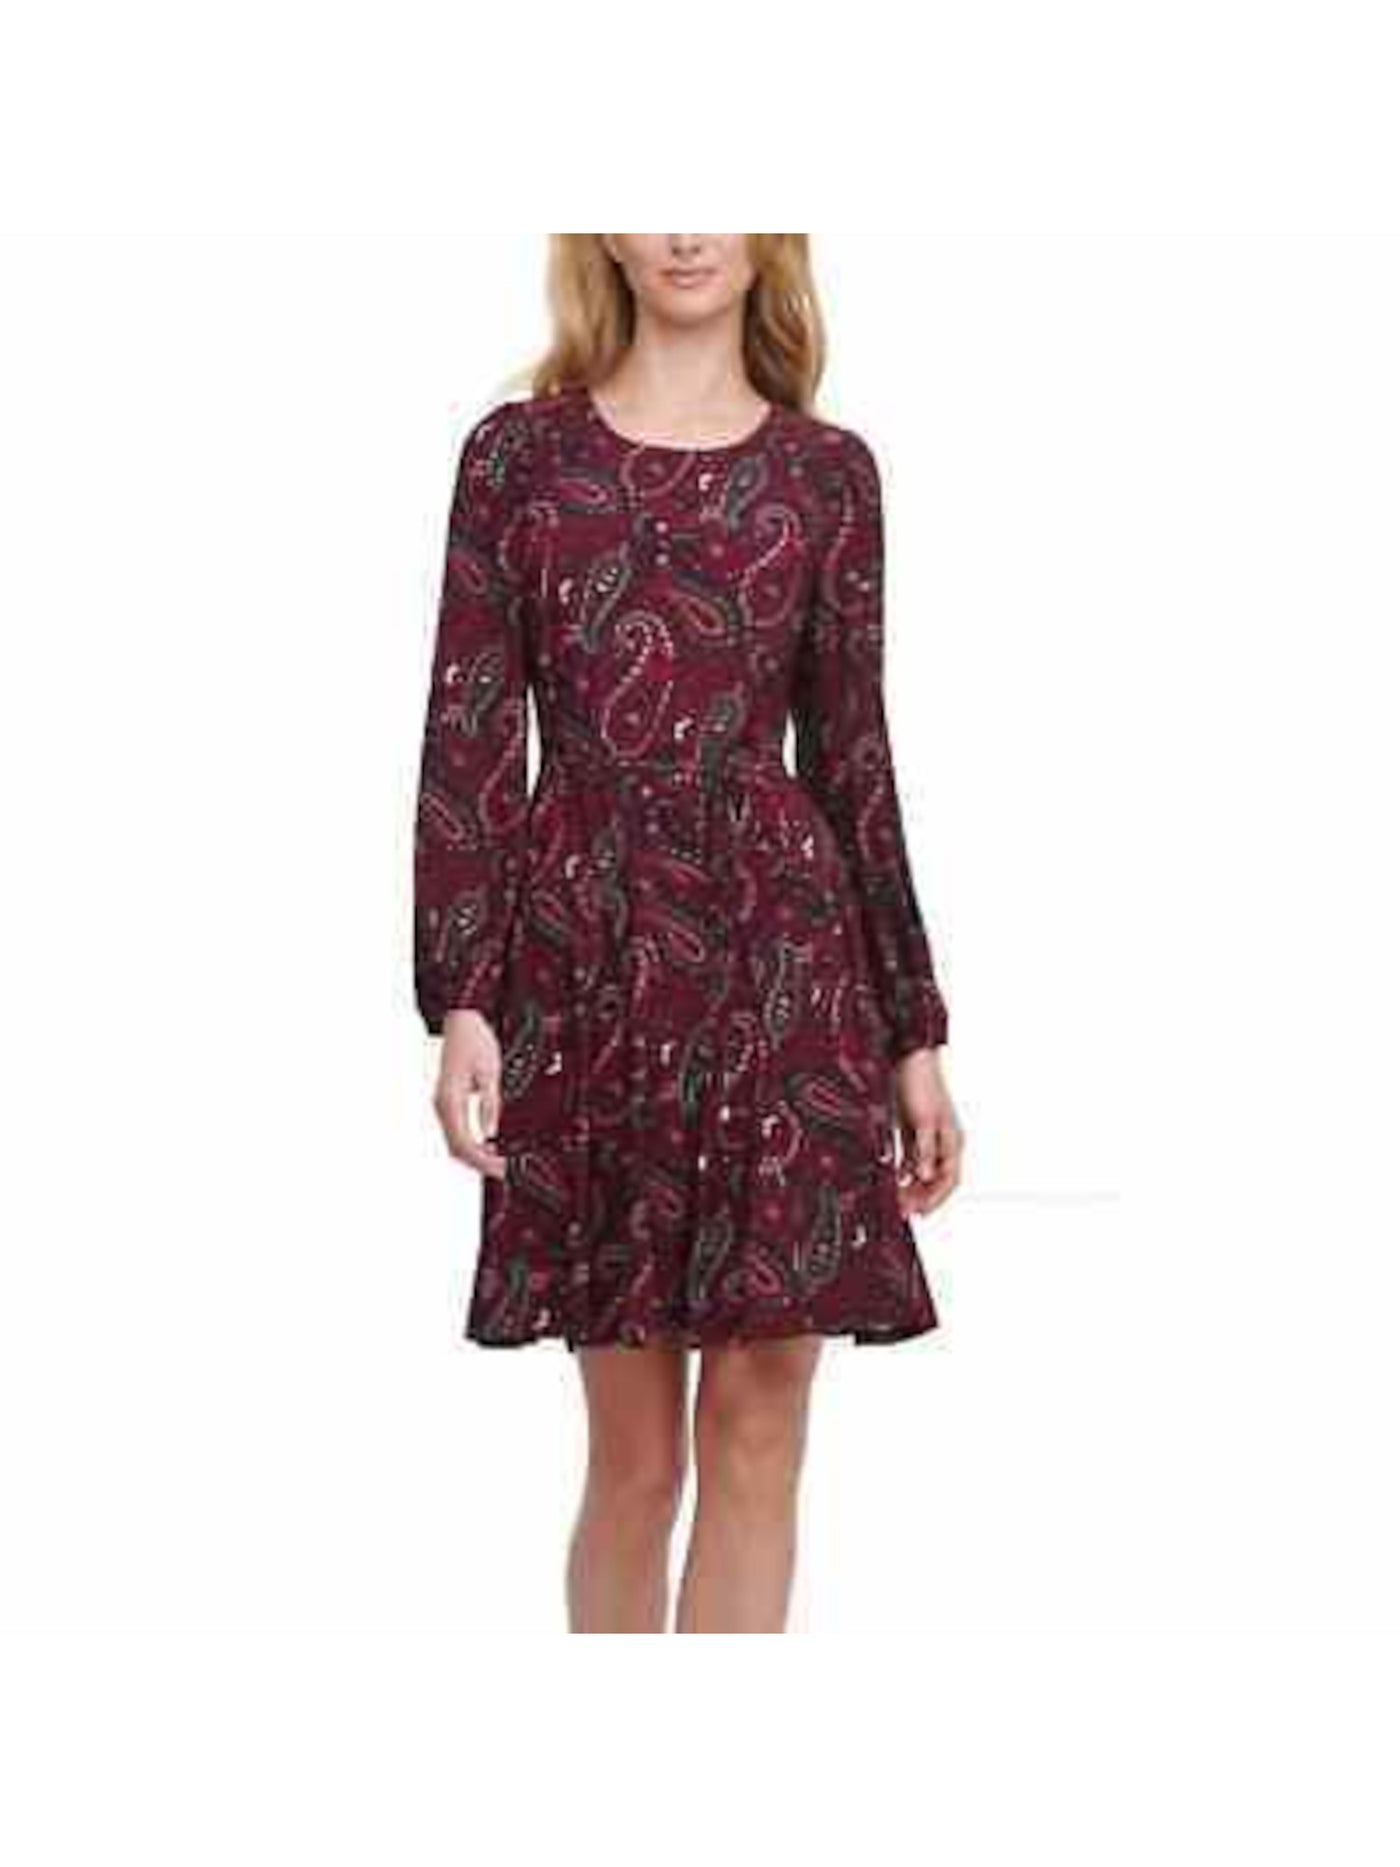 TOMMY HILFIGER Womens Black Stretch Zippered Belted Paisley Long Sleeve Crew Neck Knee Length Wear To Work Fit + Flare Dress 12